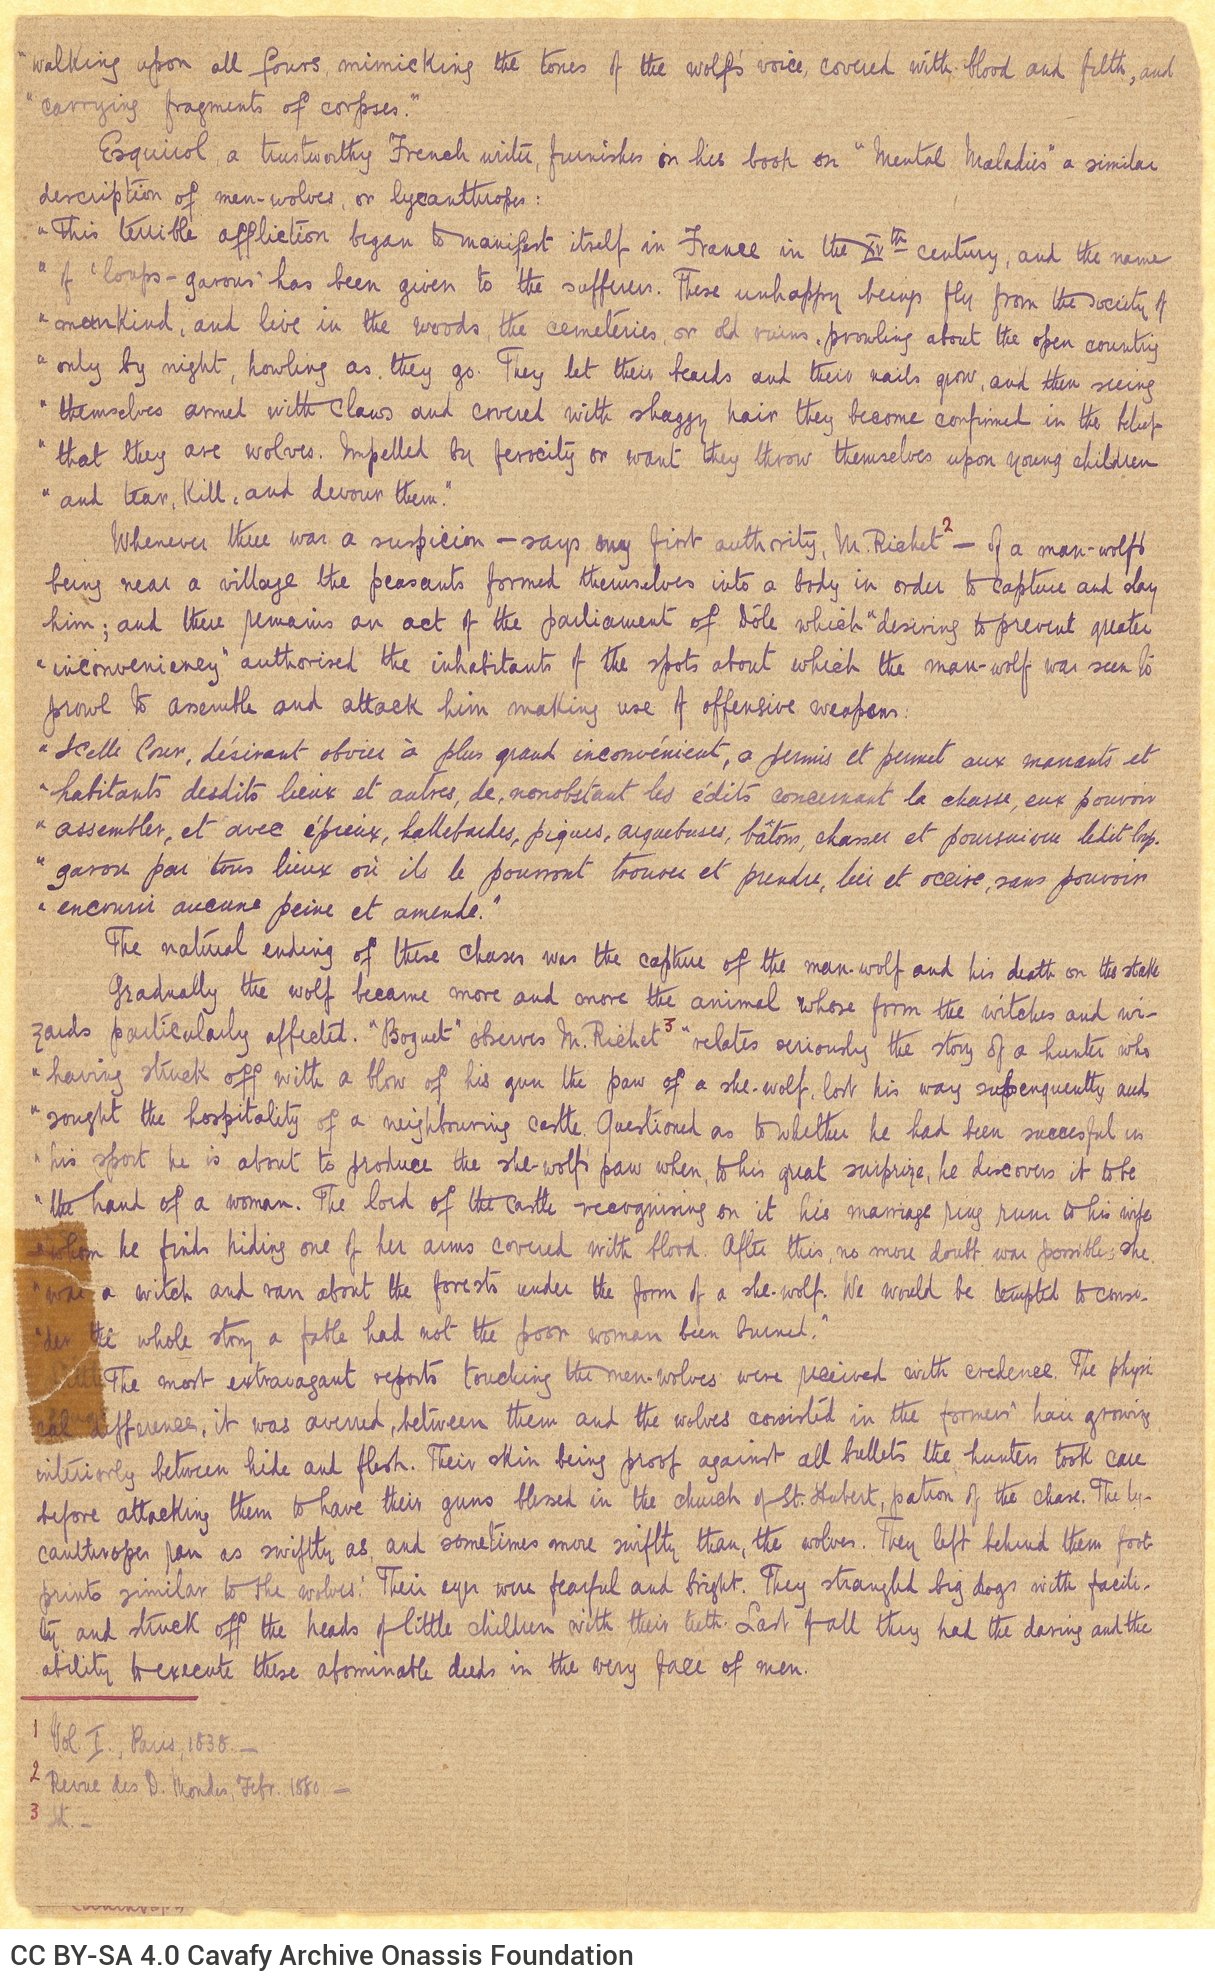 Fragment of a handwritten text on lycanthropy and the also handwritten unfinished text "Woman and the Ancients" (on men's 